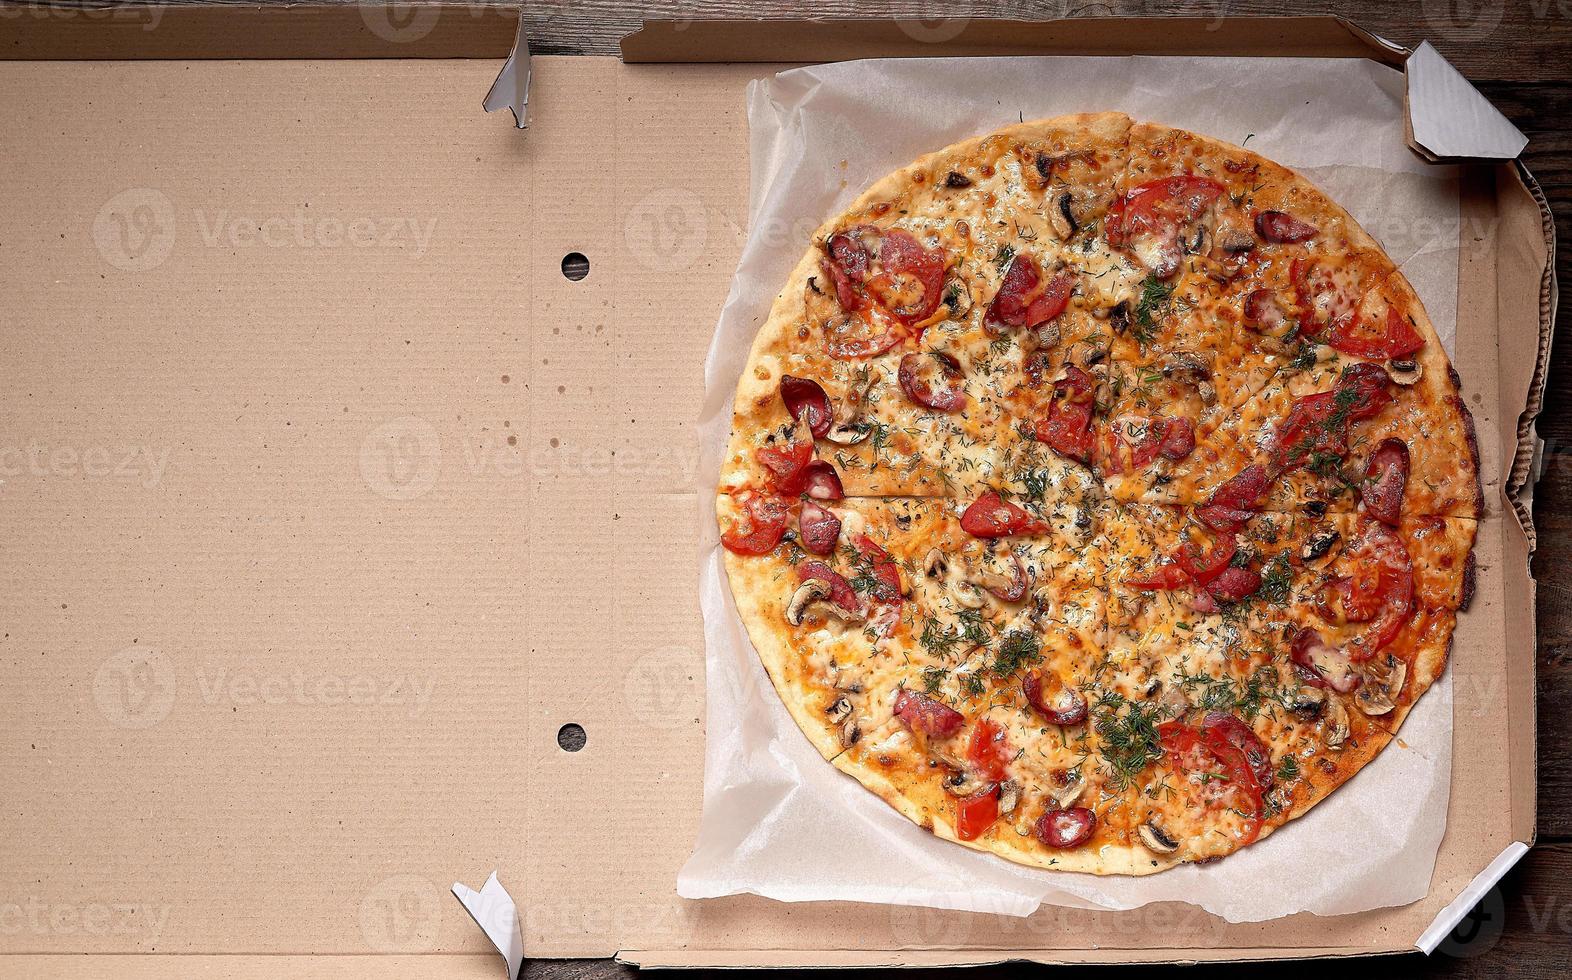 baked round pizza with smoked sausages, mushrooms, tomatoes, cheese and dill in an open cardboard box photo